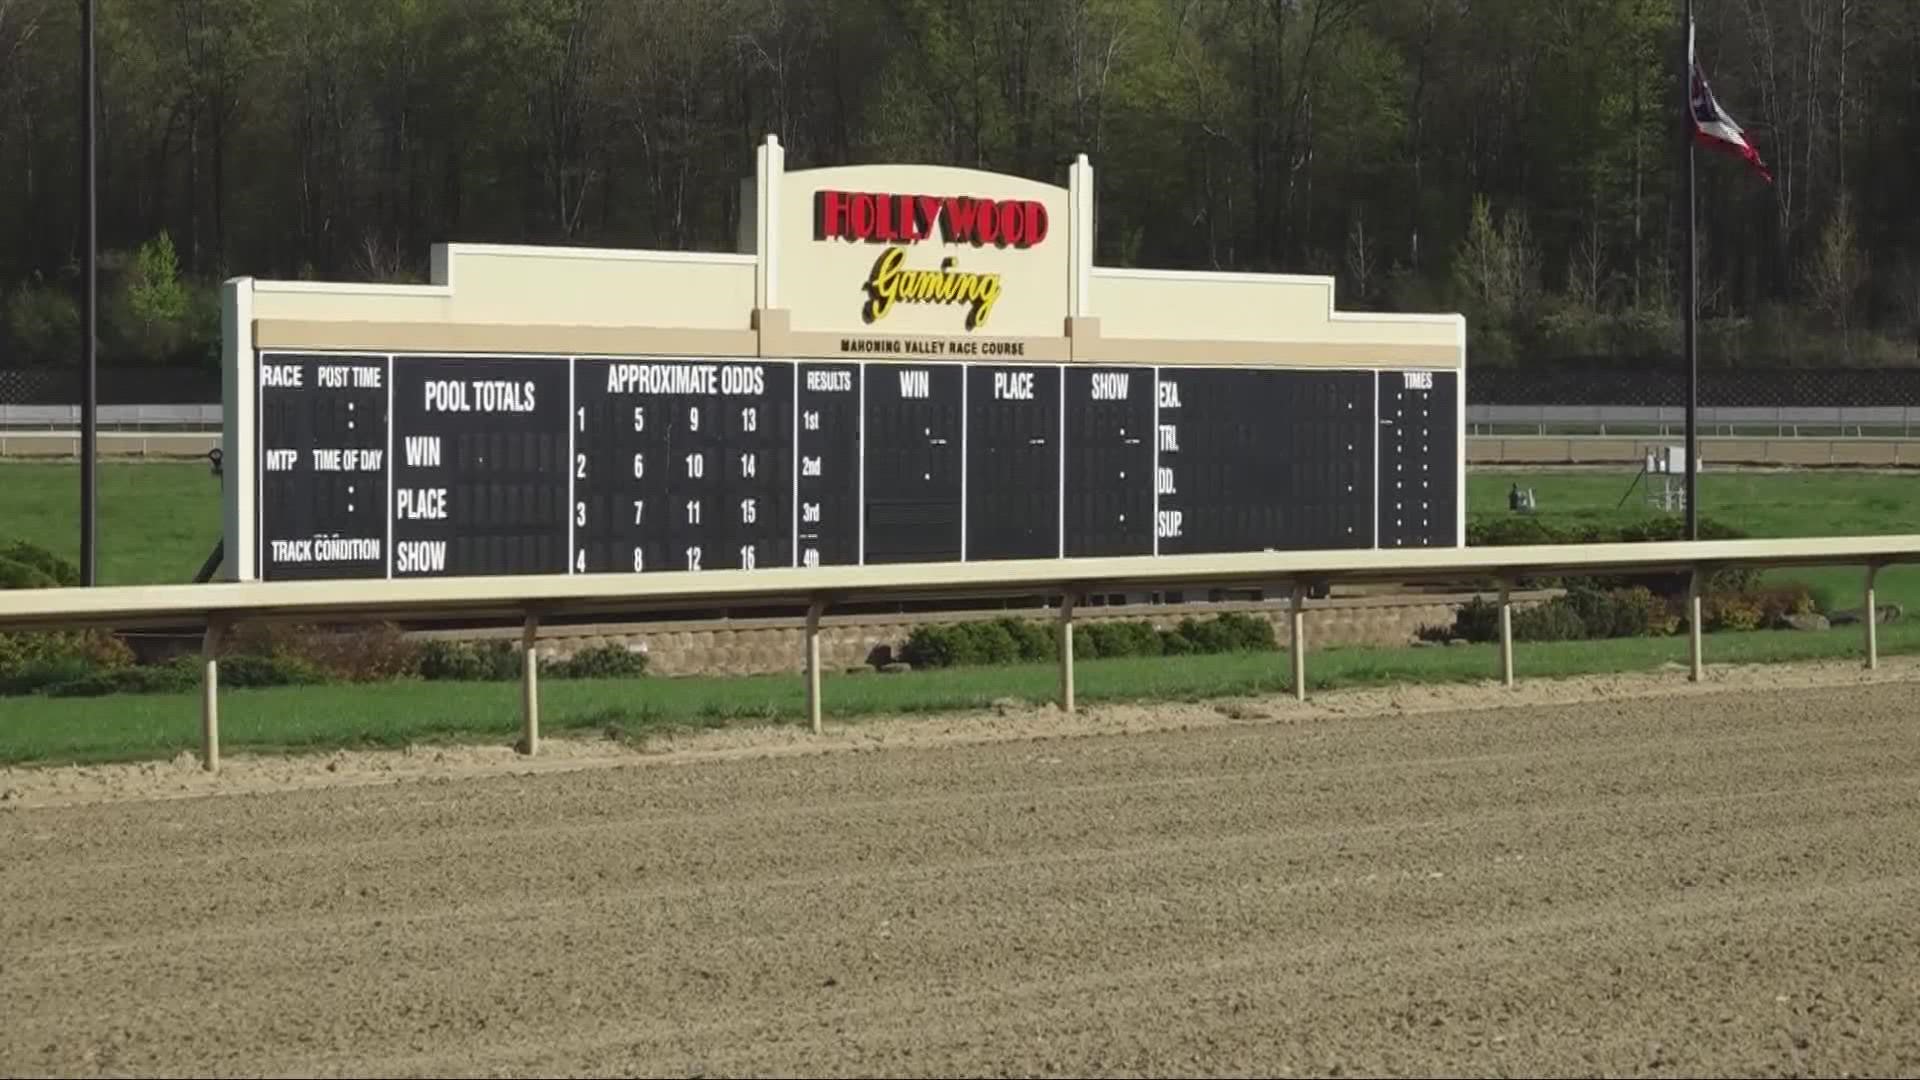 Sonny Leon has won more than 200 races at Hollywood Gaming at Mahoning Valley Race Course. He also has another 90 victories at JACK Thistledown Racino.